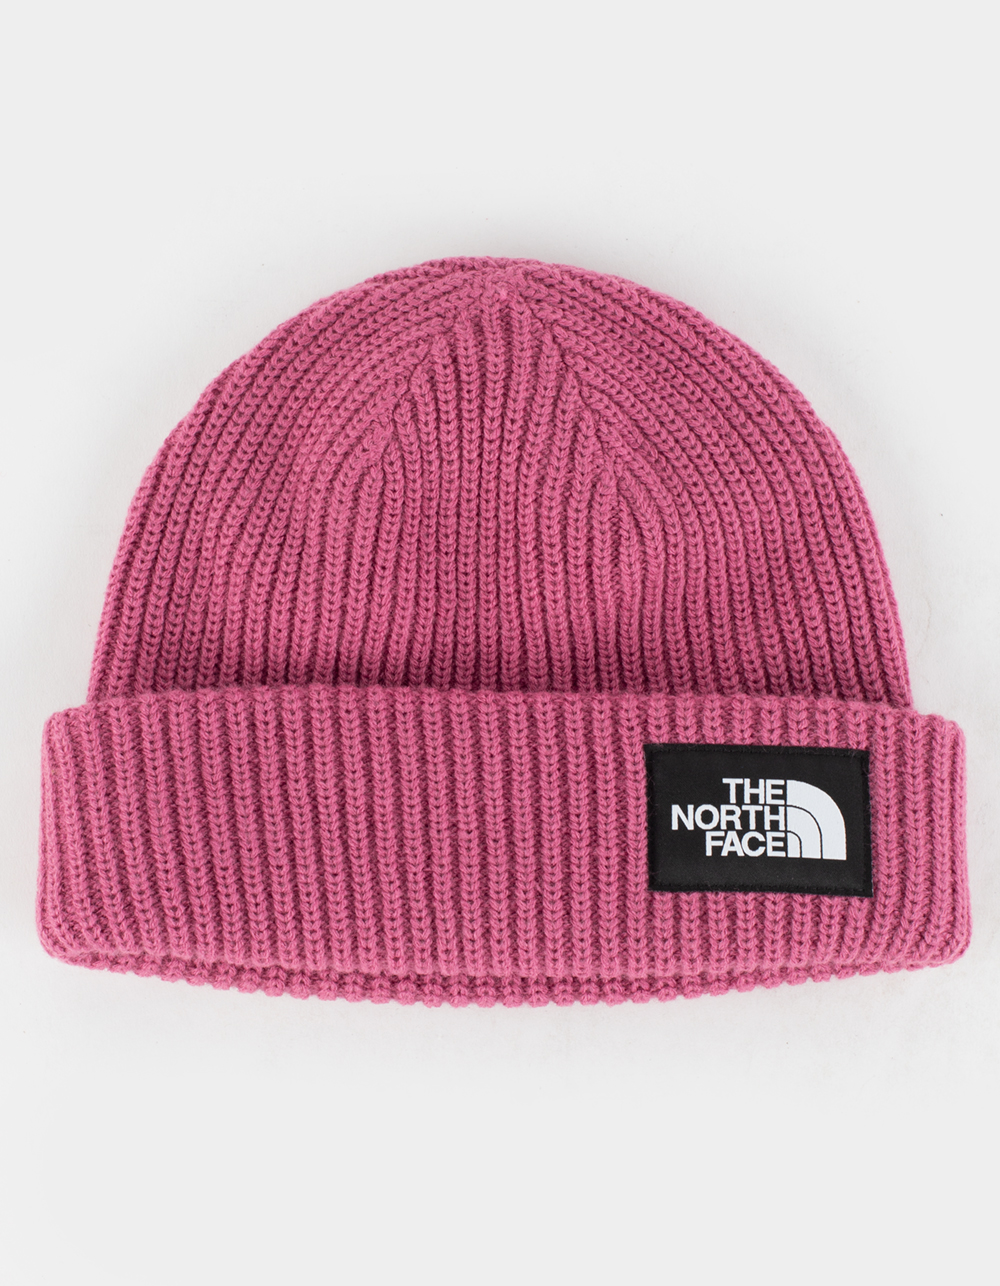 THE NORTH FACE Salty Dog Beanie - PURPLE | Tillys